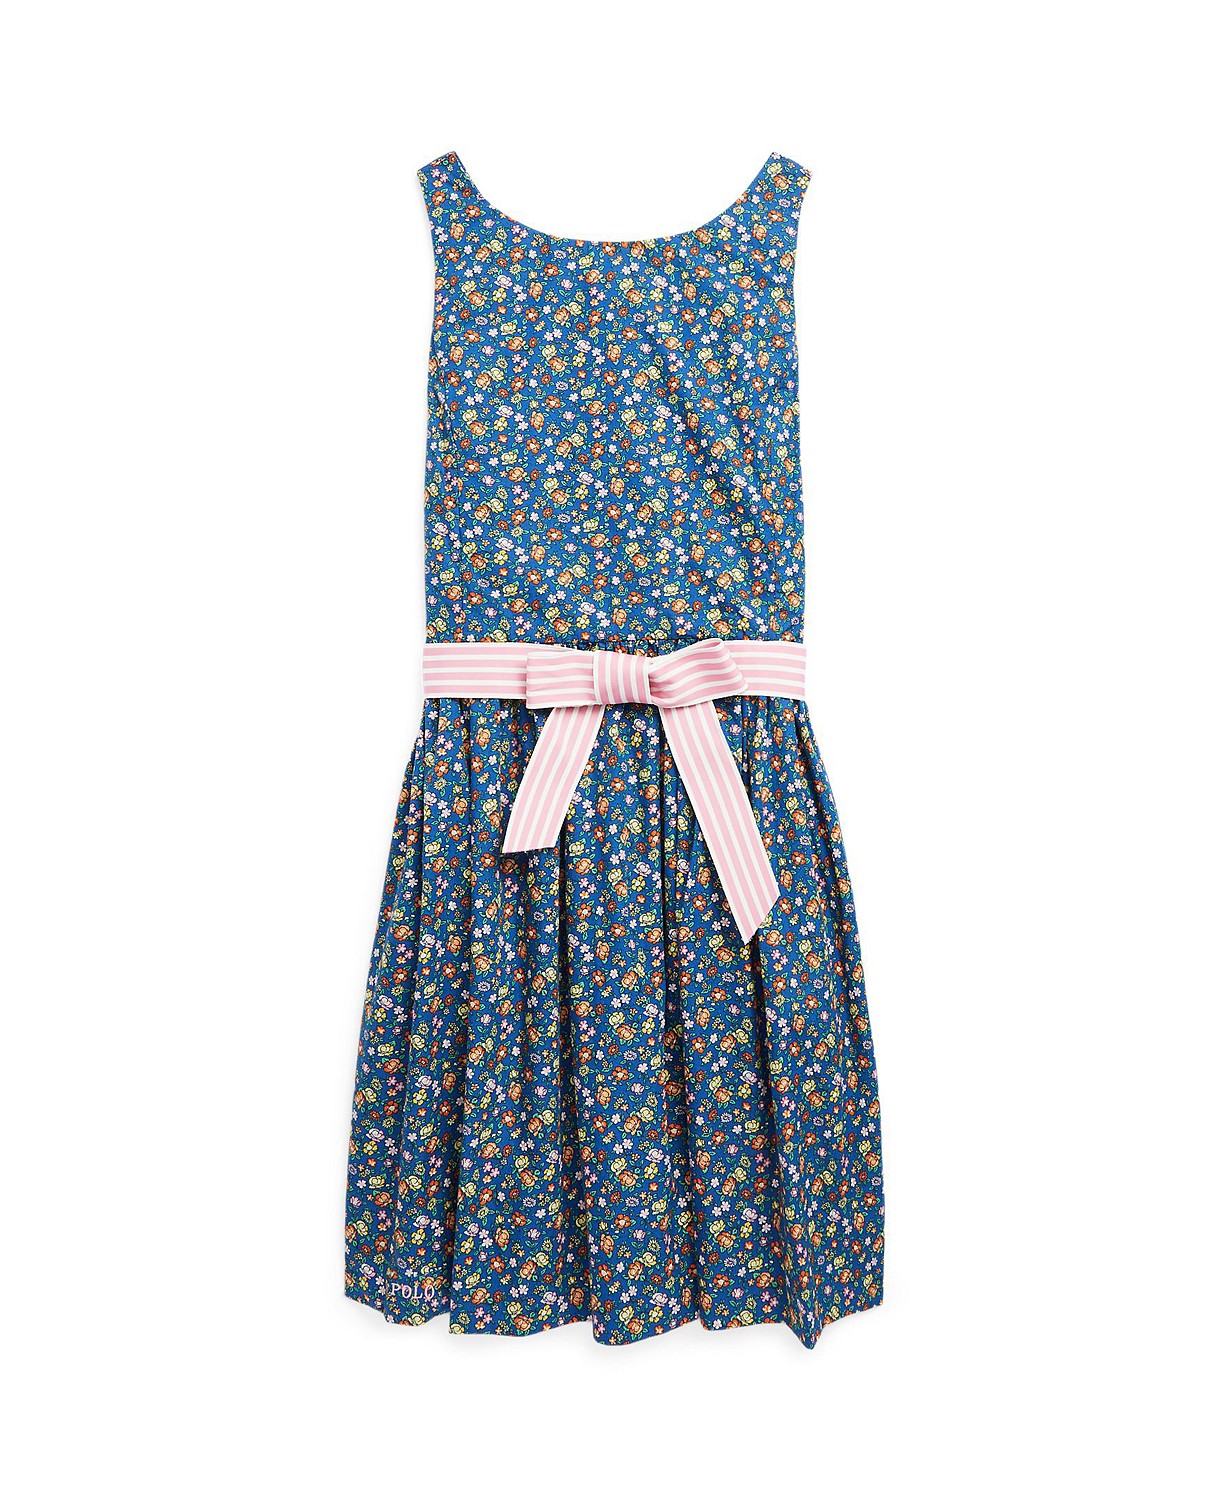 Big Girls Floral Cotton Poplin Fit and Flare Dress with Bloomer